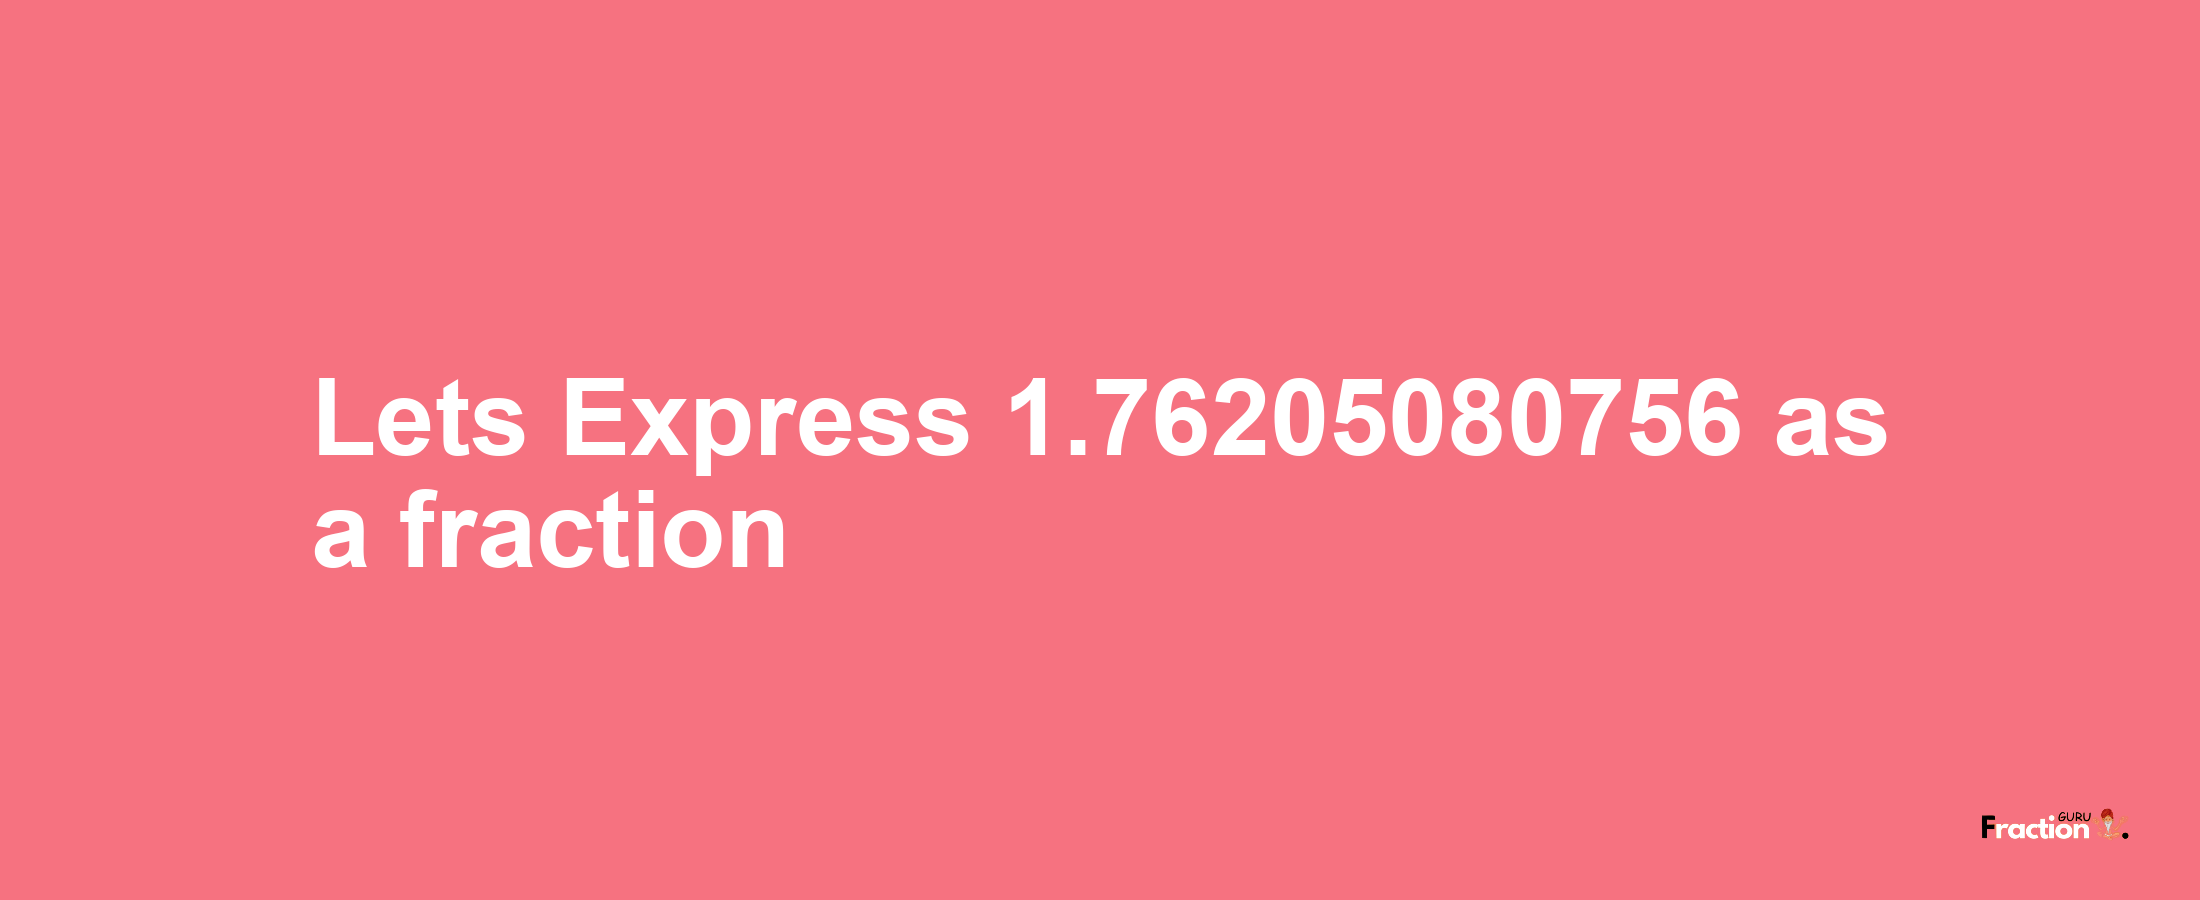 Lets Express 1.76205080756 as afraction